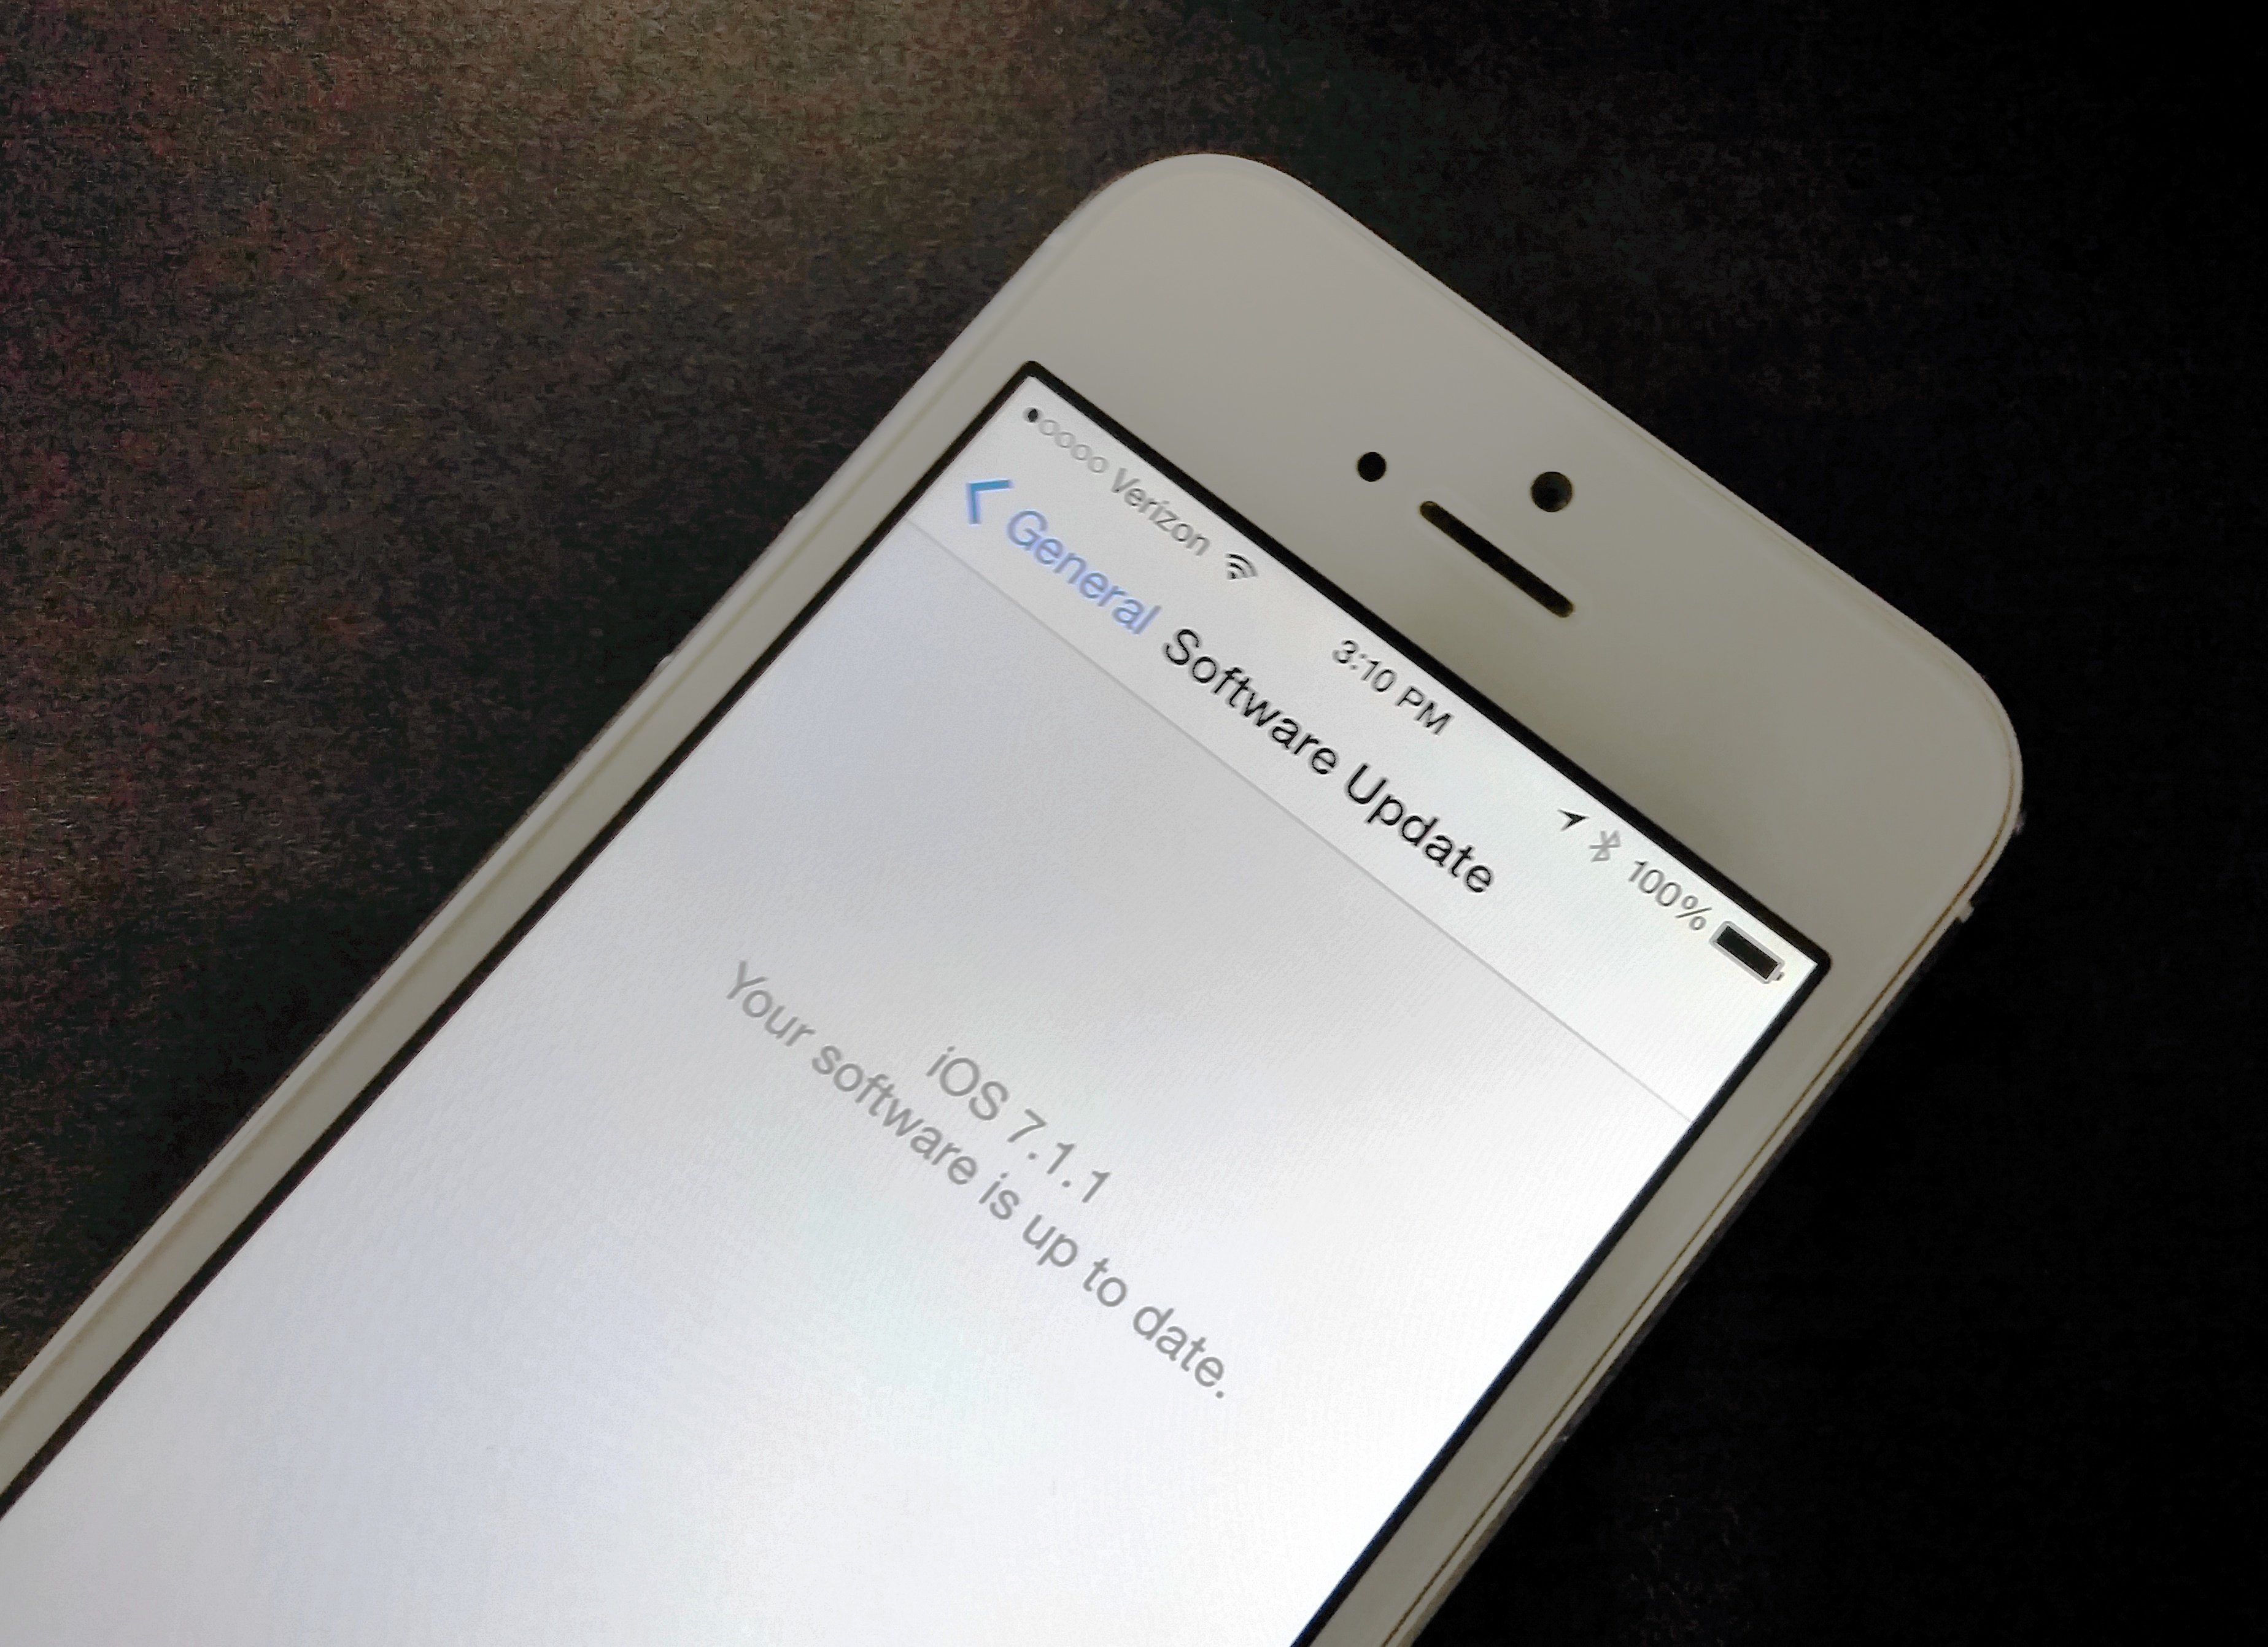 Here are common iOS 7.1.1 update problems and possible fixes.